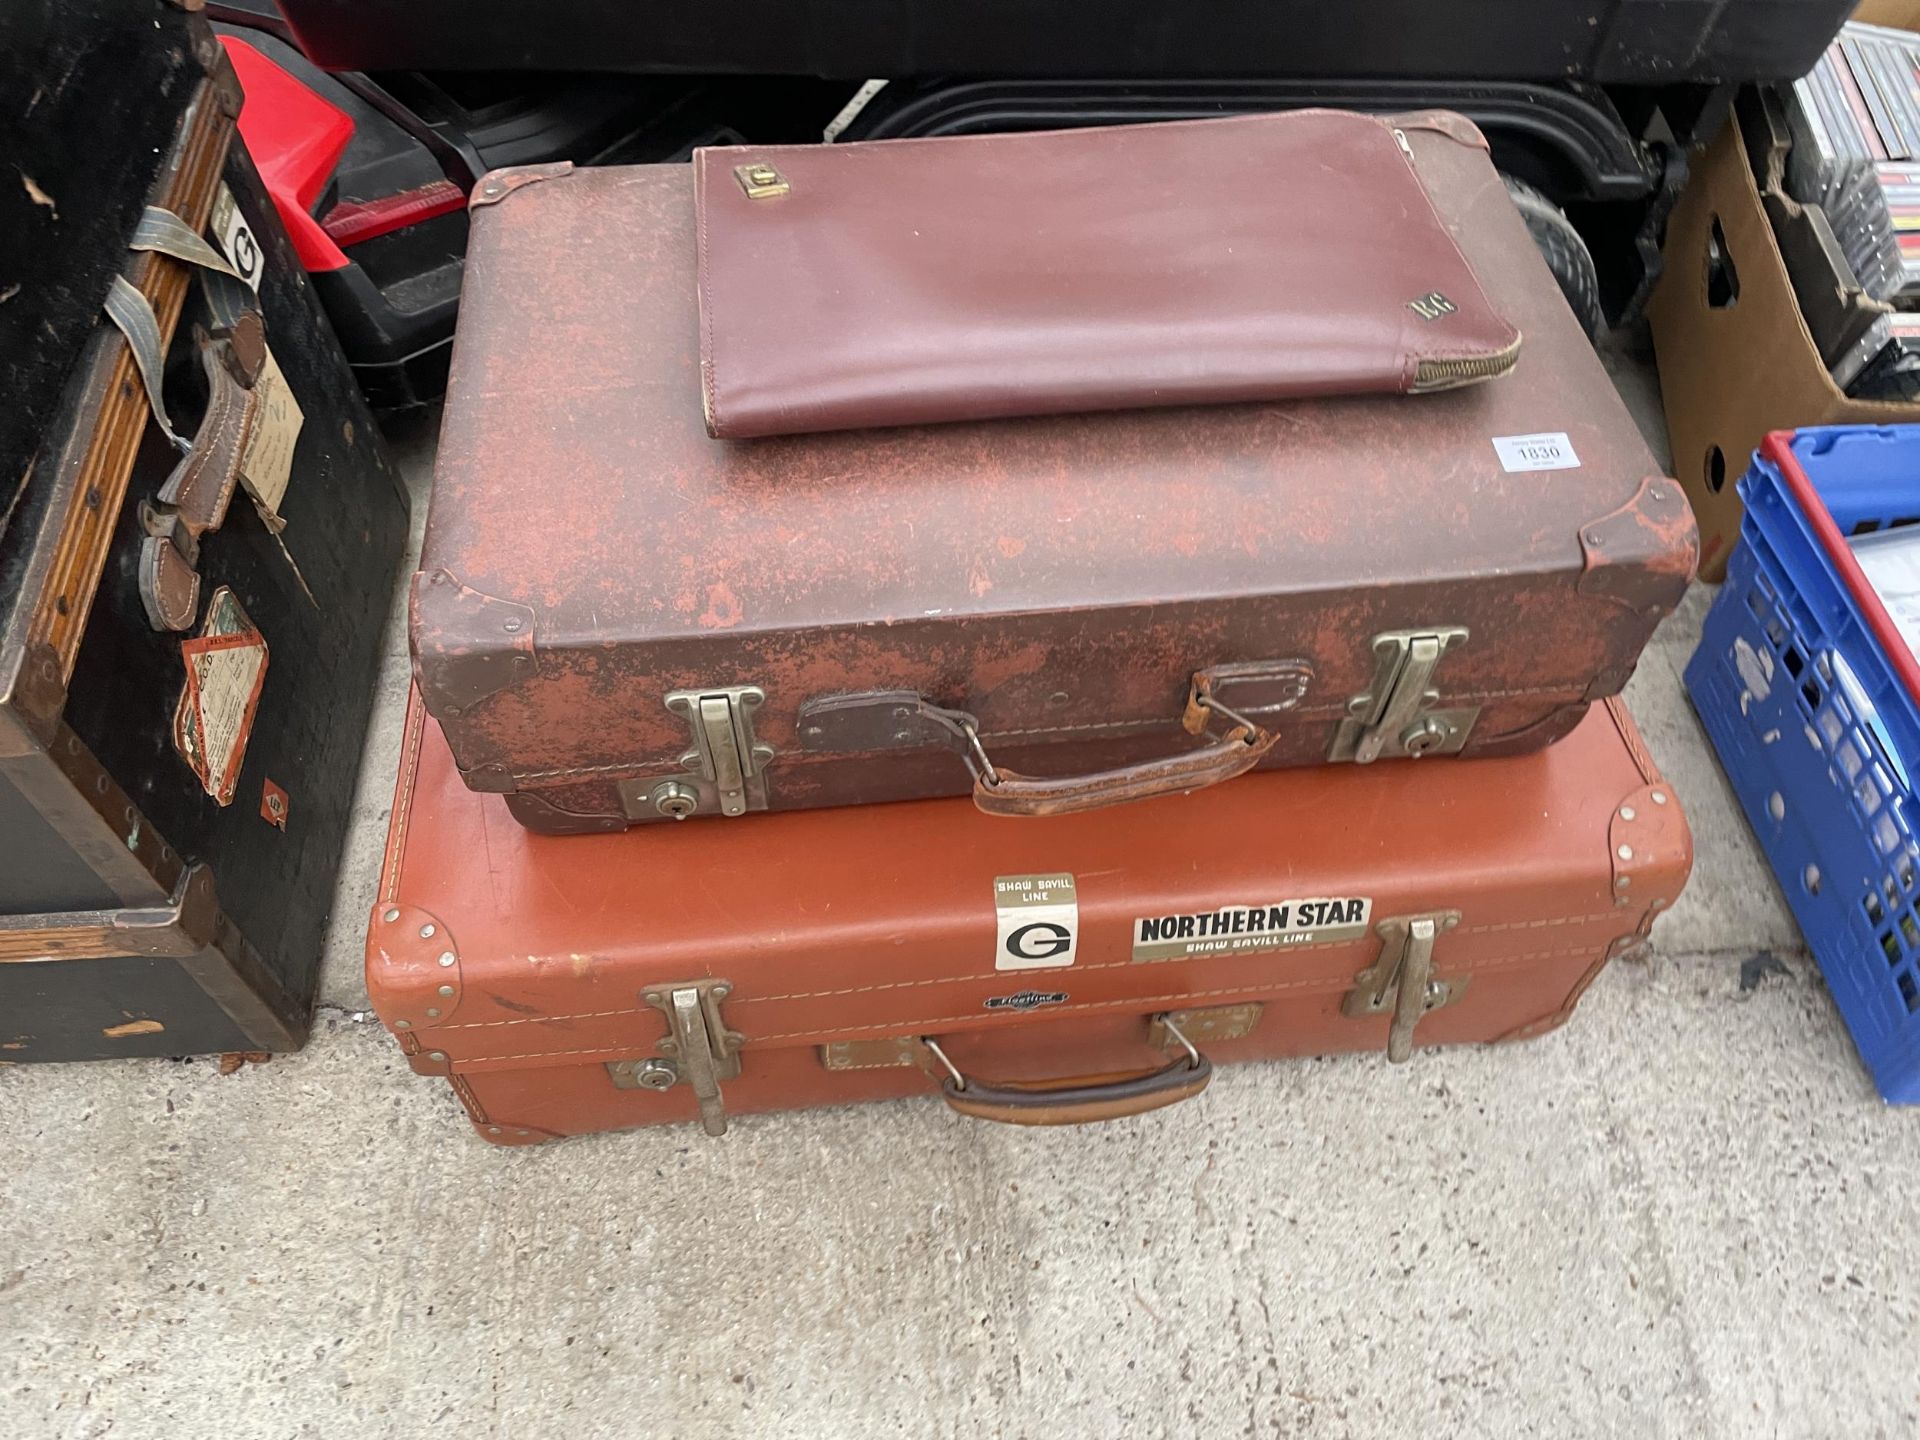 TWO VINTAGE TRAVEL CASES AND A LEATHER FOLDER